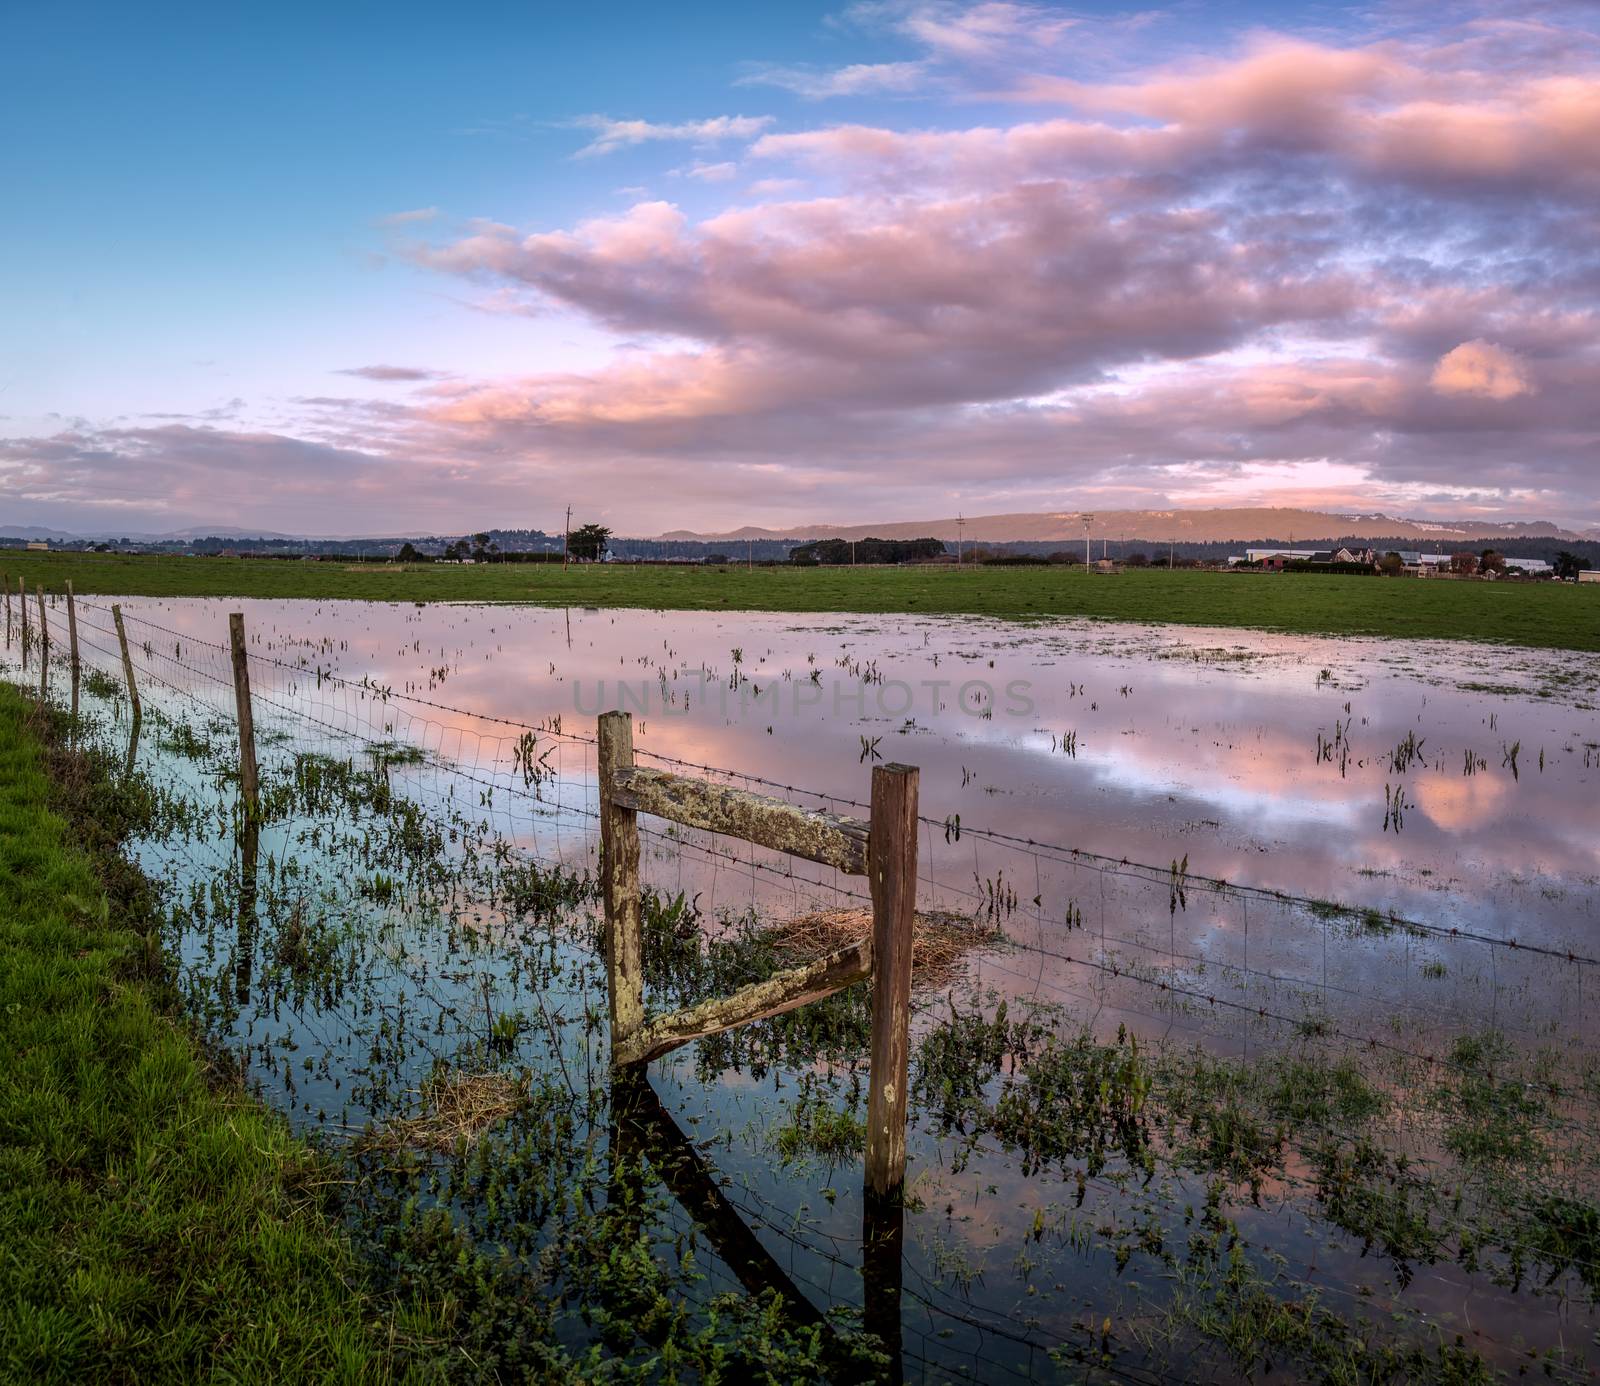 Sunset Reflections in a Flooded Pasture, Northern California, USA by backyard_photography